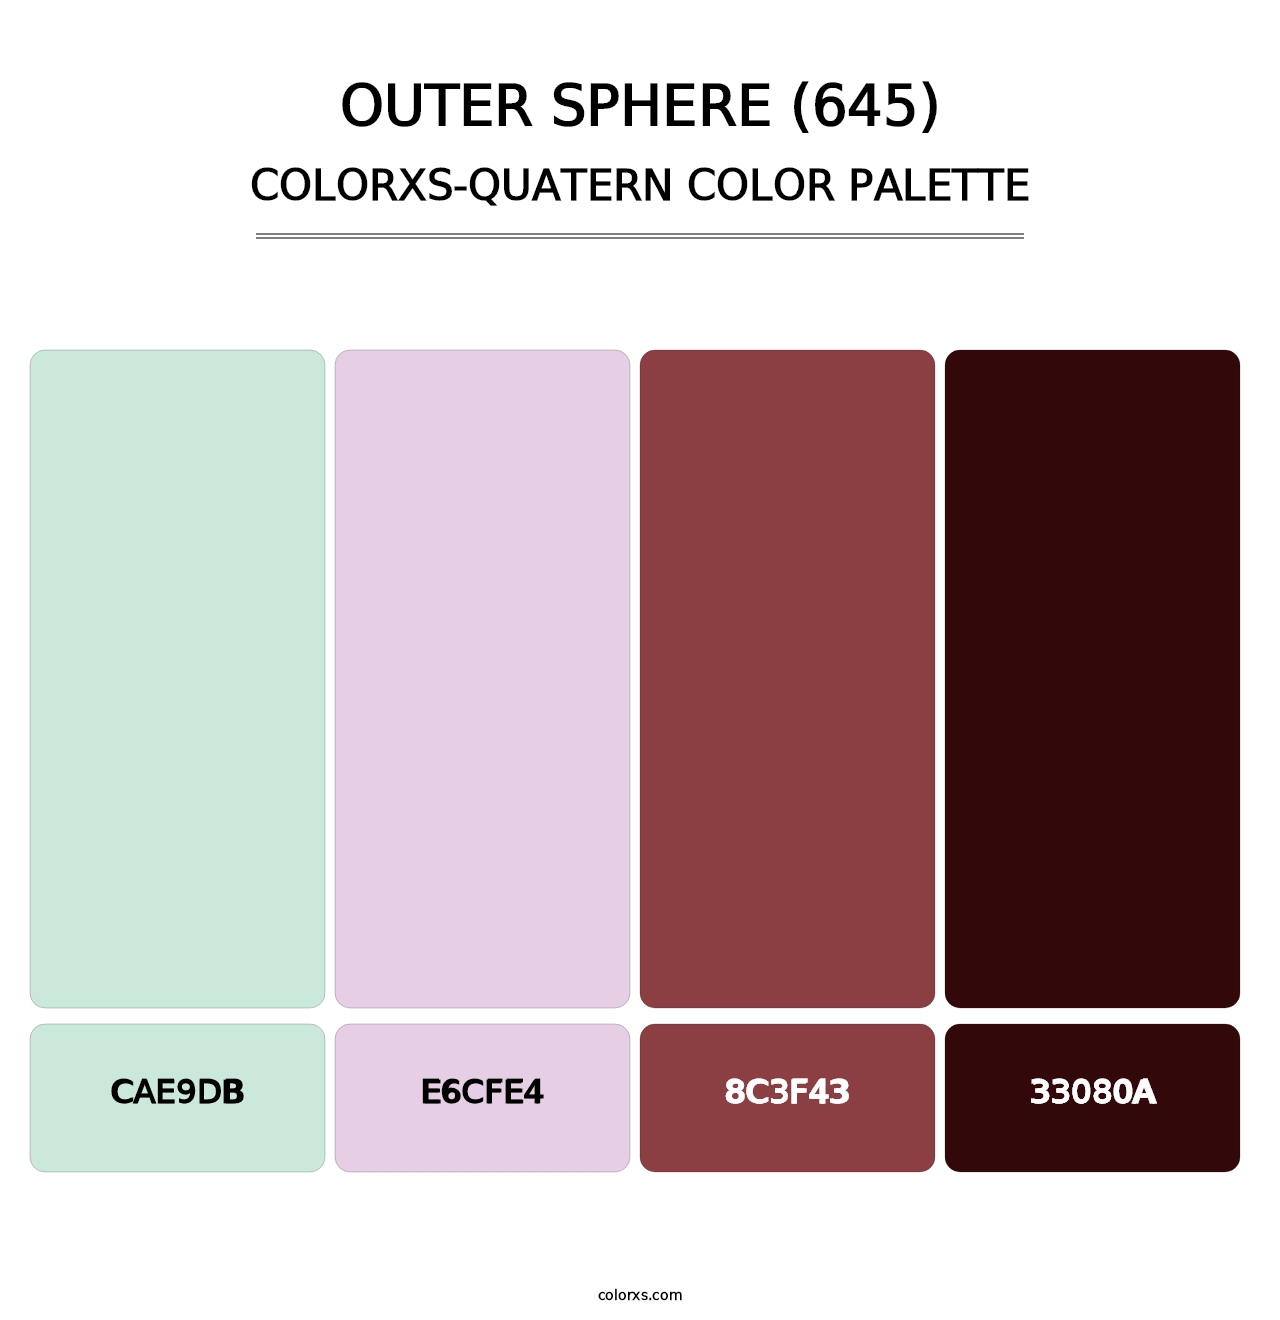 Outer Sphere (645) - Colorxs Quatern Palette